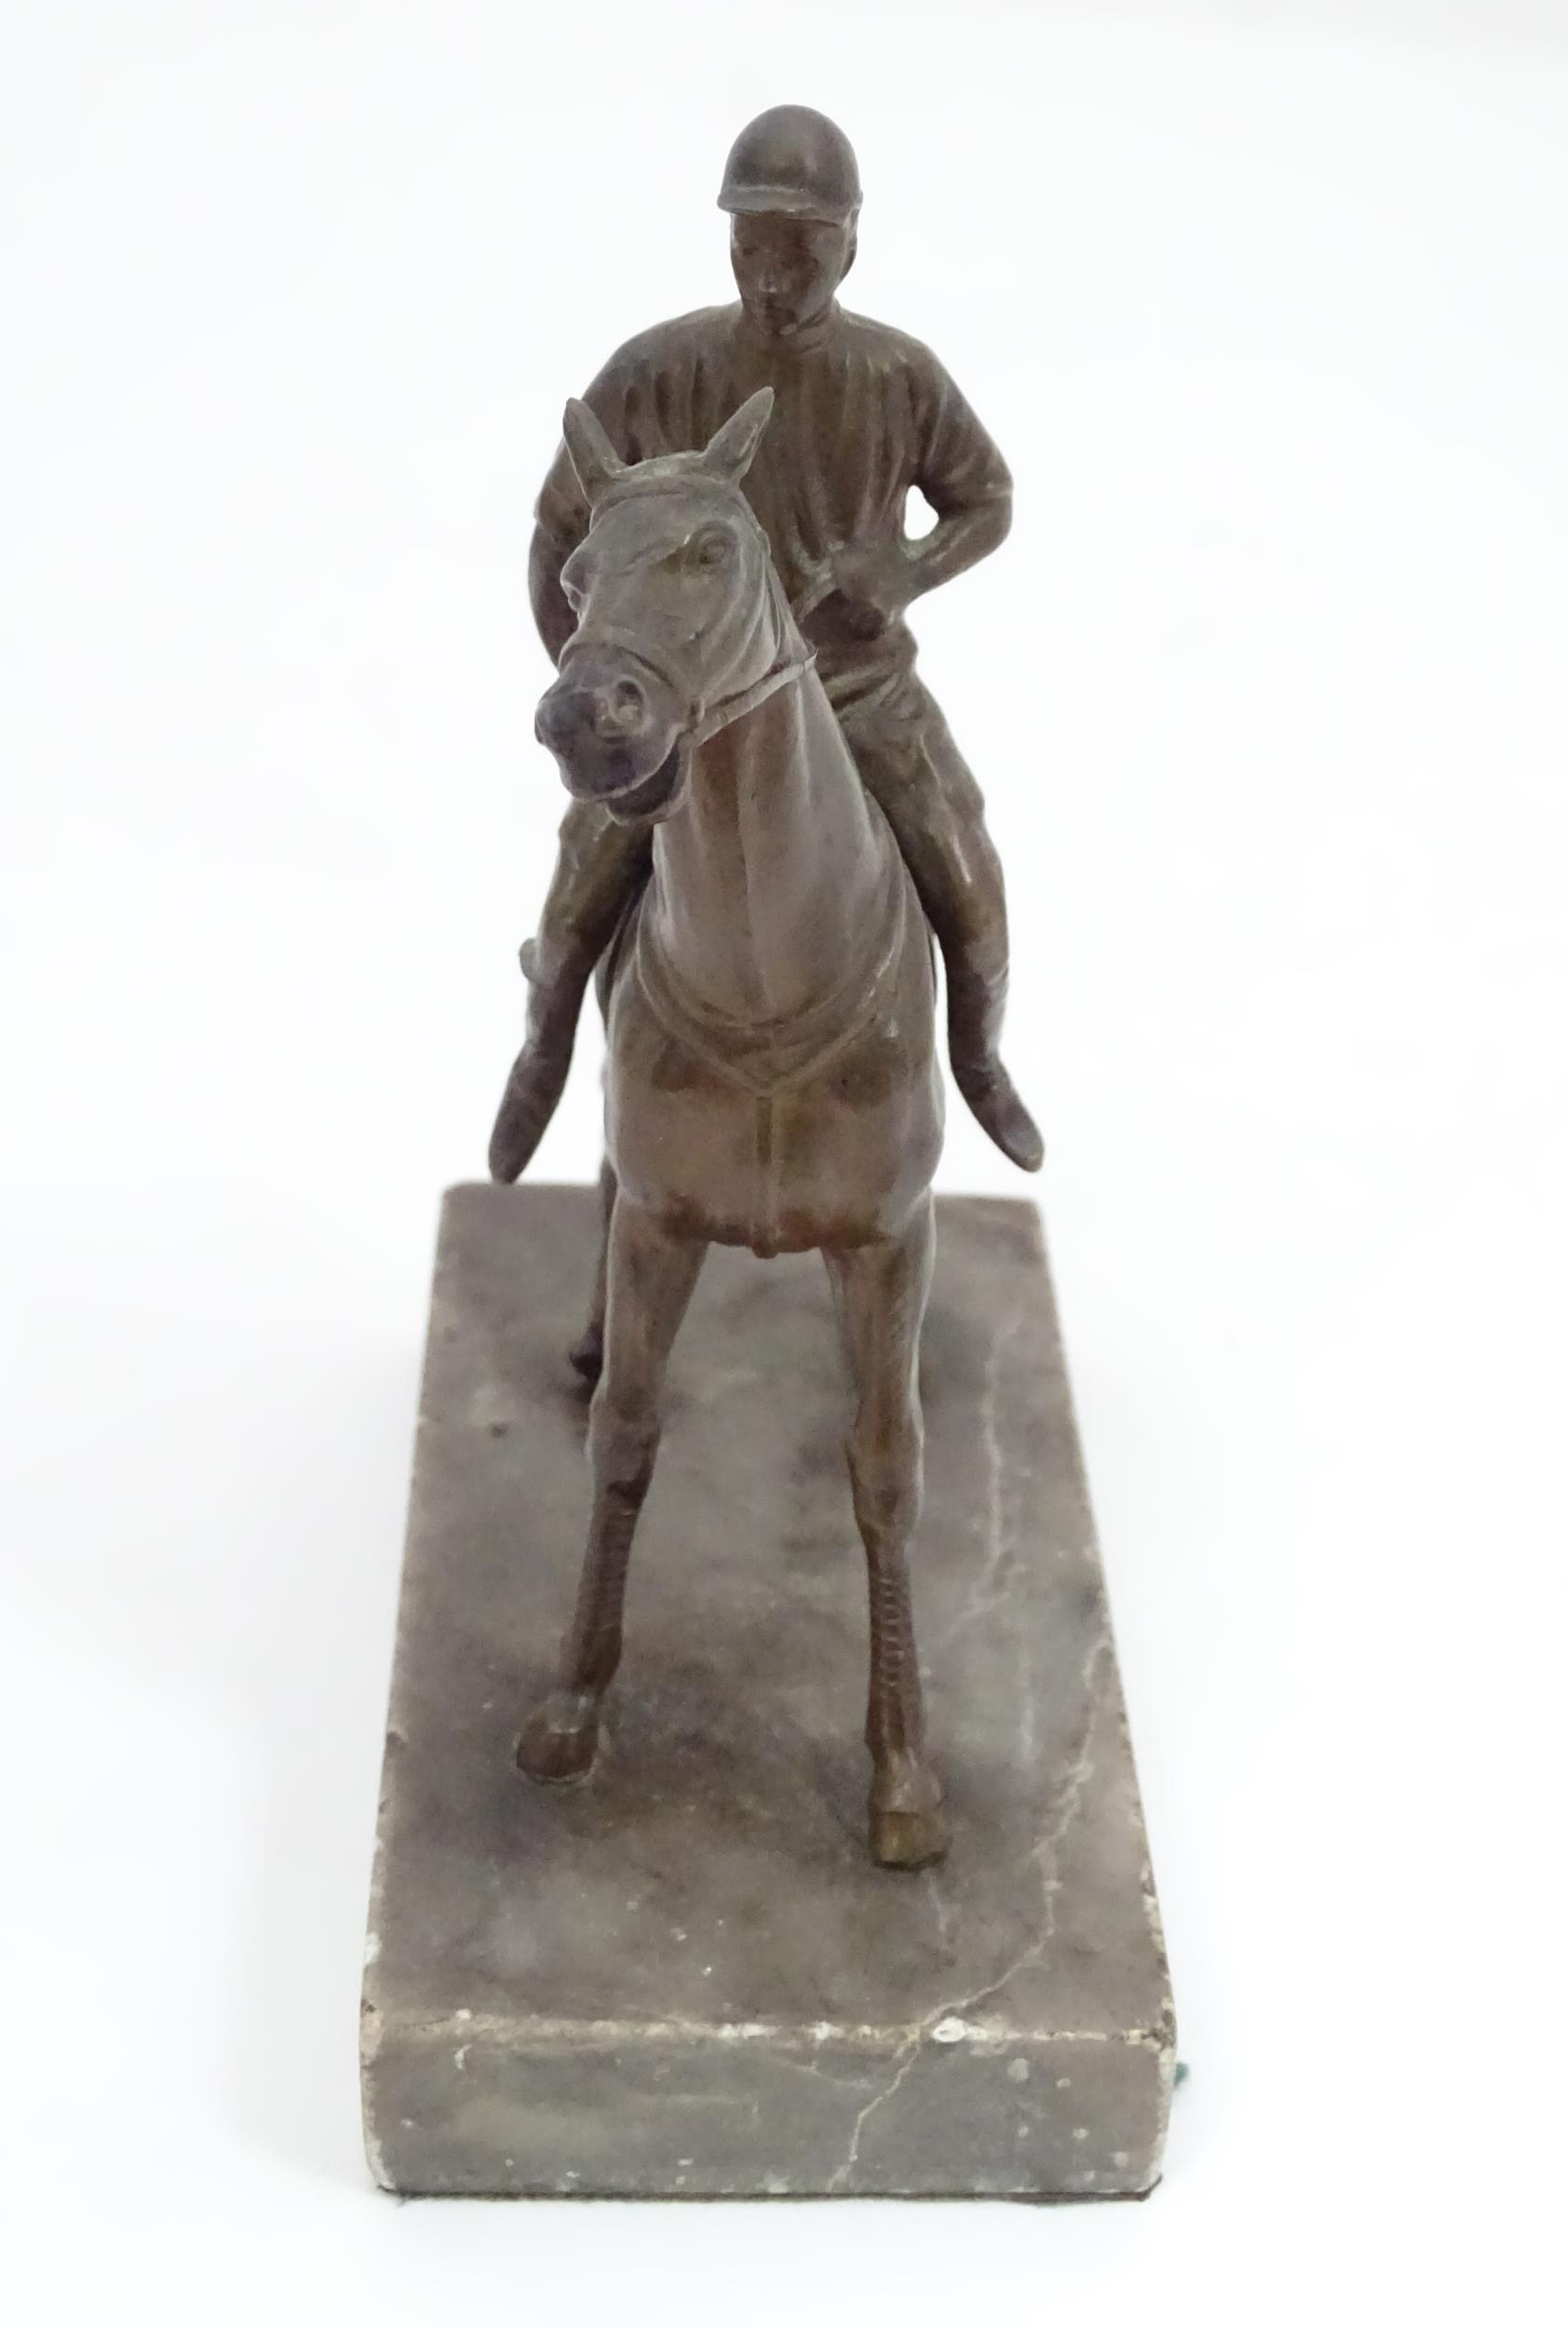 A 20thC cast sculpture modelled as a jockey on horseback, upon a marble base. Approx. 5 1/2" high - Image 5 of 5